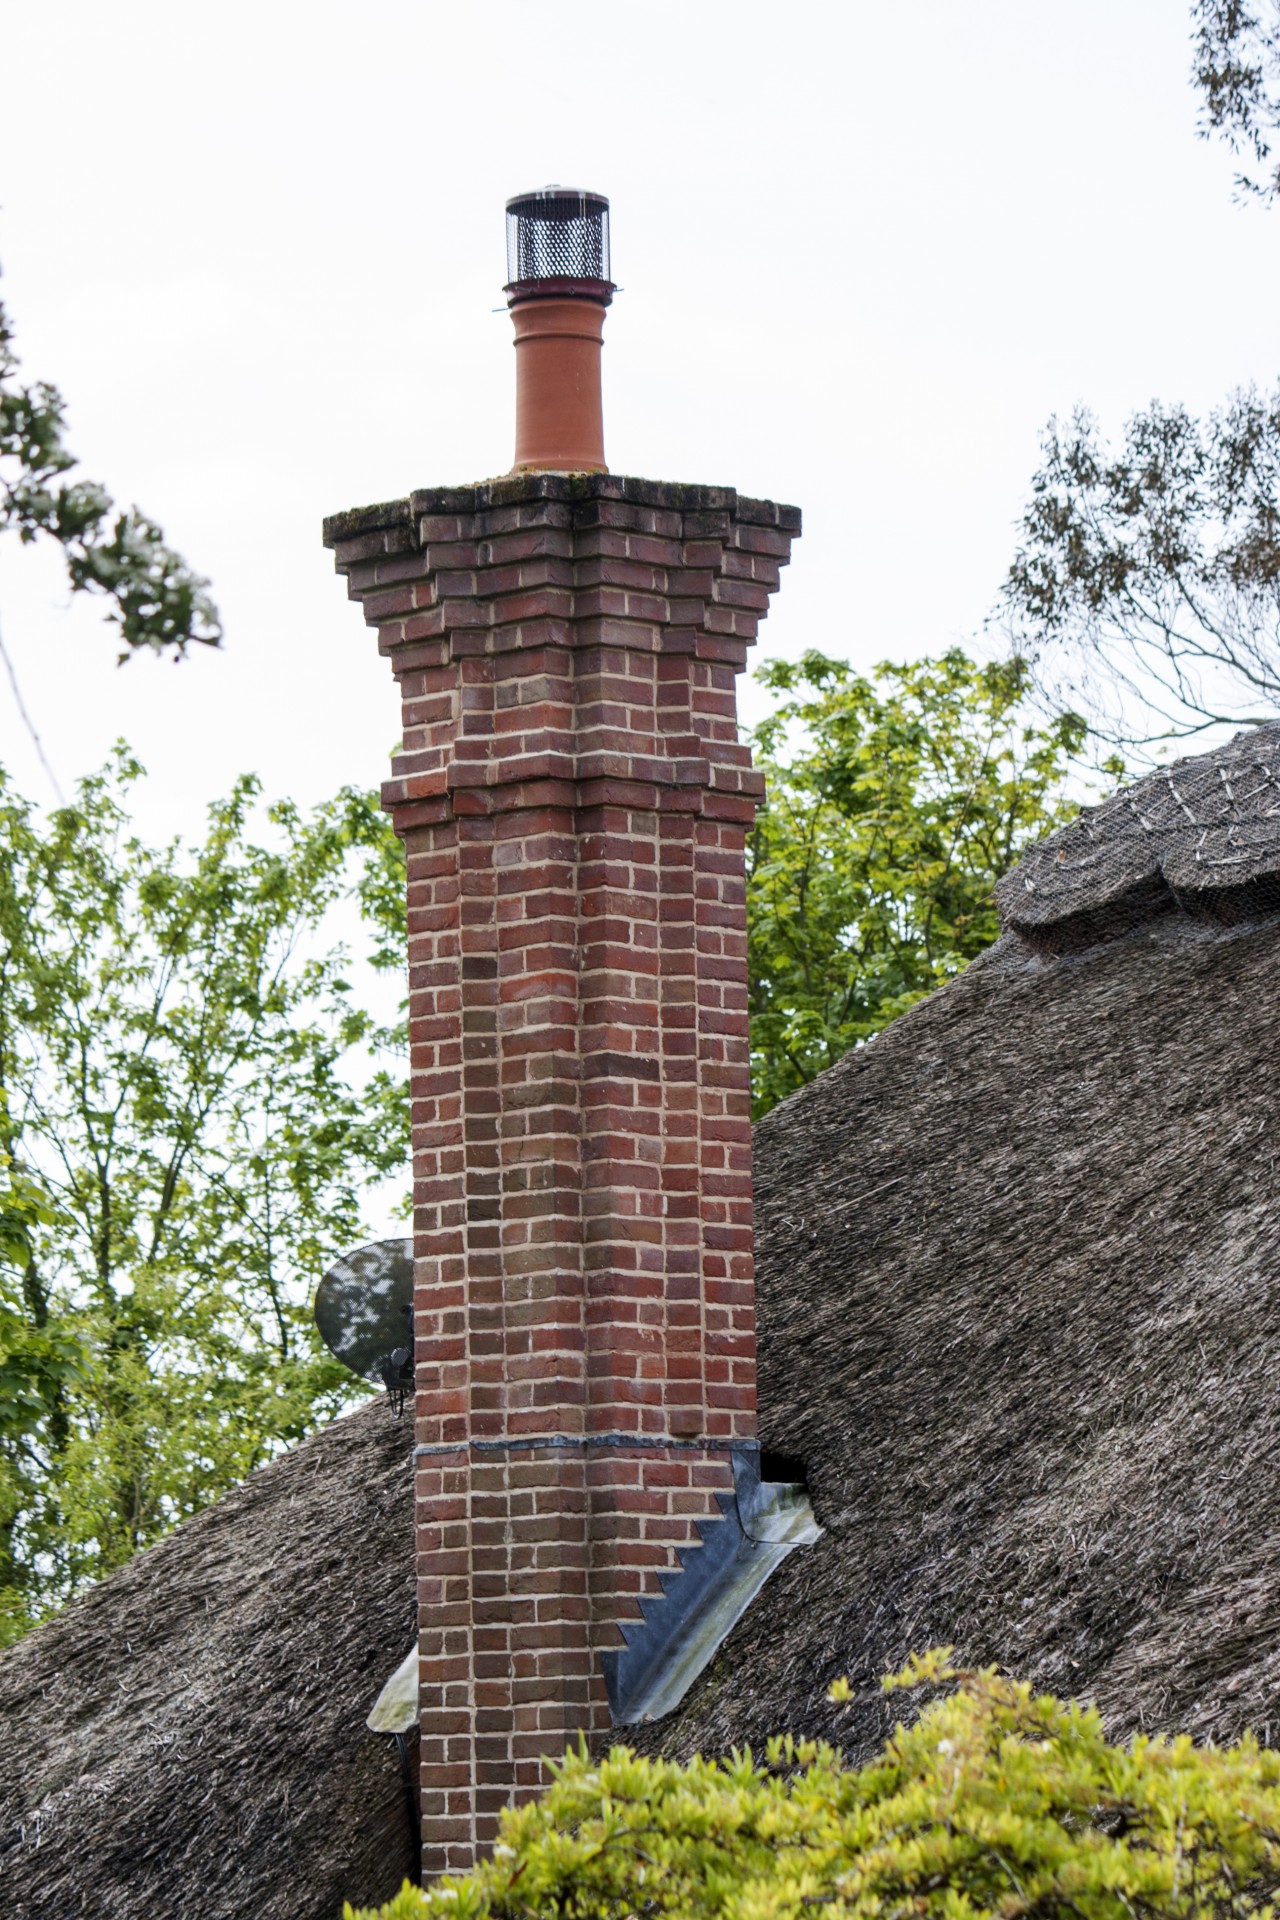 Red brick chimney stack on a thatch roof in close-up details